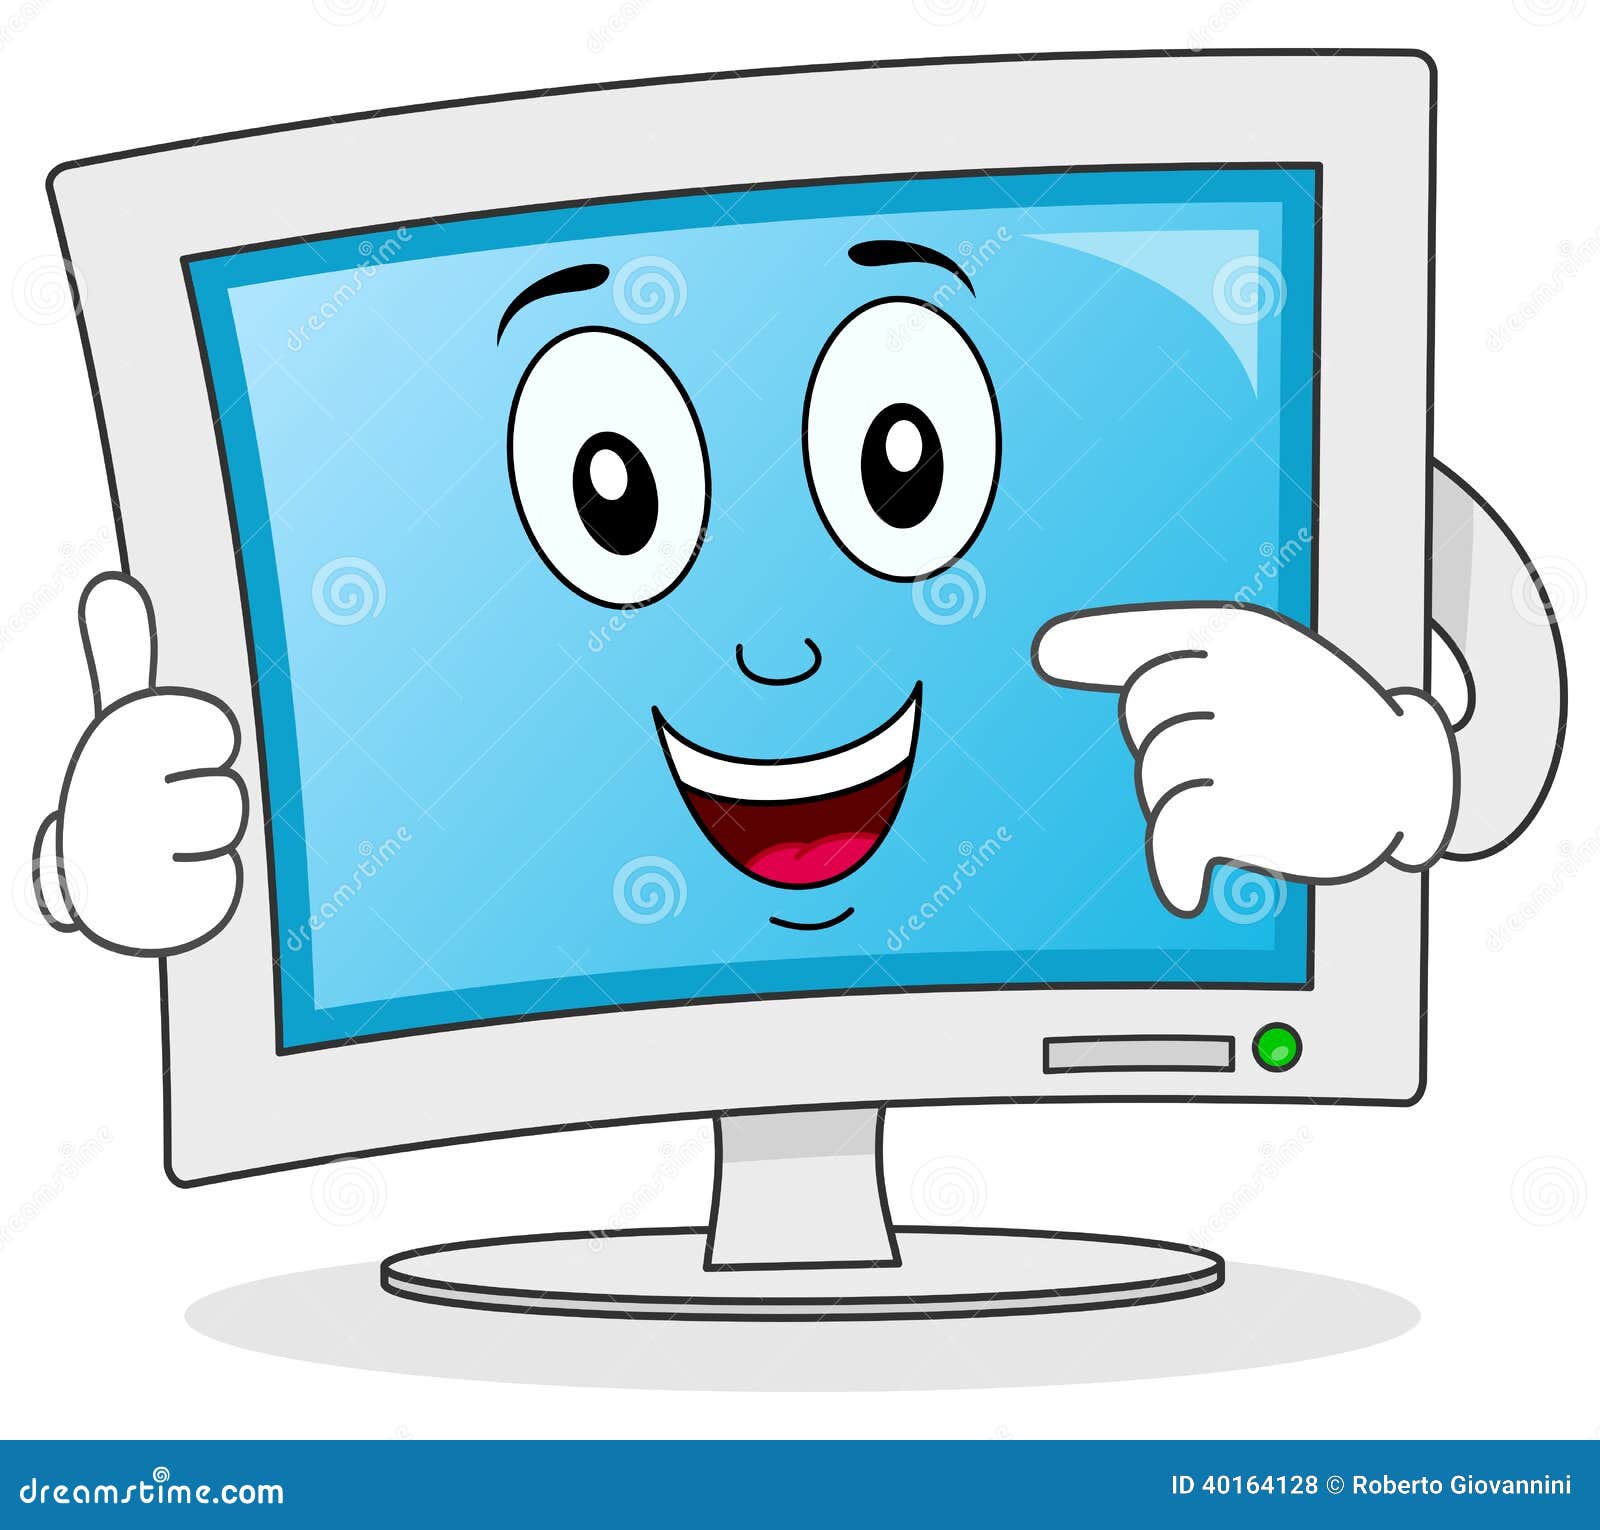 computer-monitor-cartoon-character-funny-smiling-thumbs-up-isolated-white-background-eps-file-available-40164128.jpg